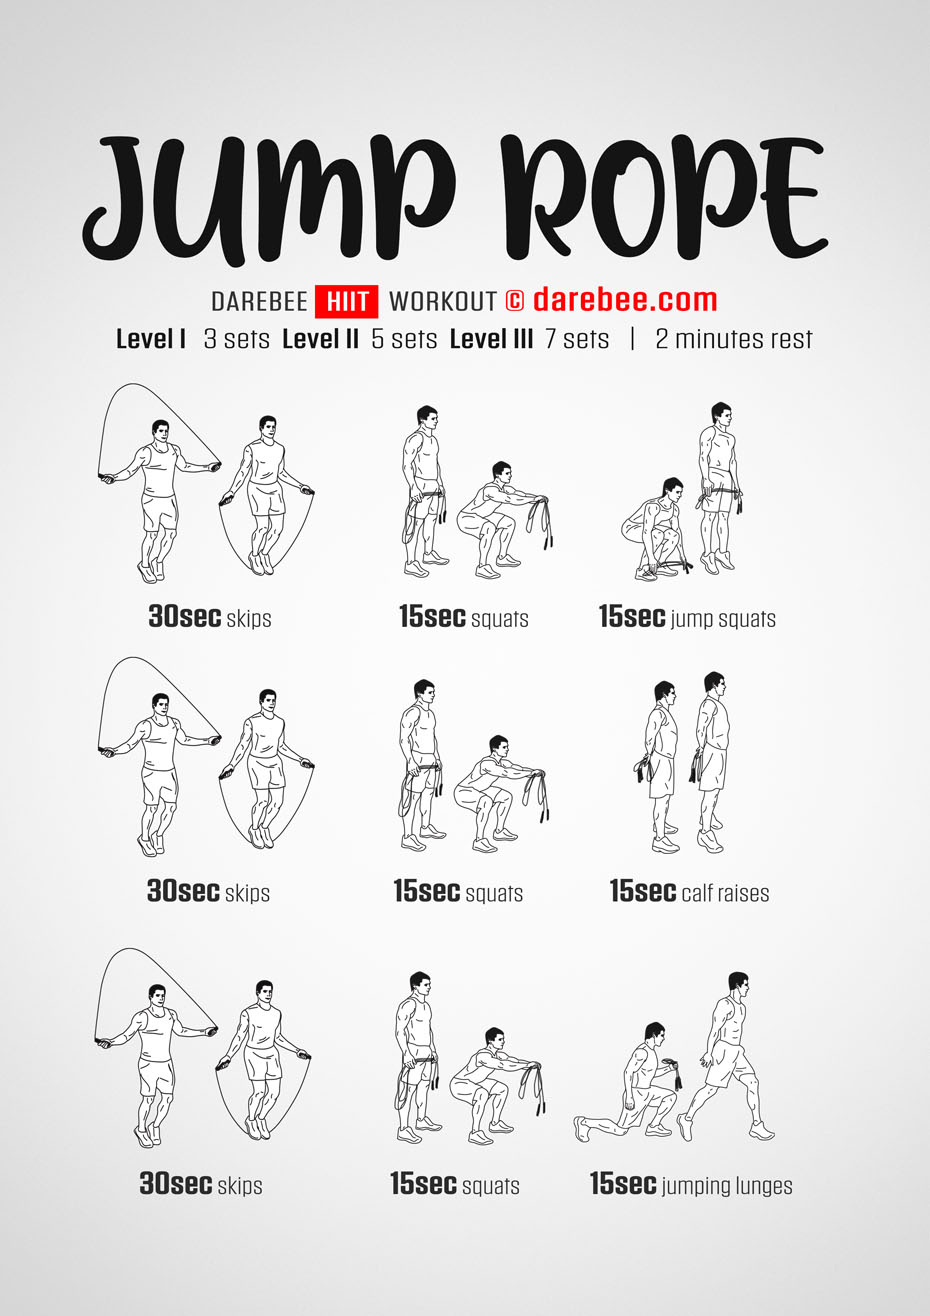 Jump Rope is a Darebee home-fitness High Intensity Interval Training workout you can do at home. 